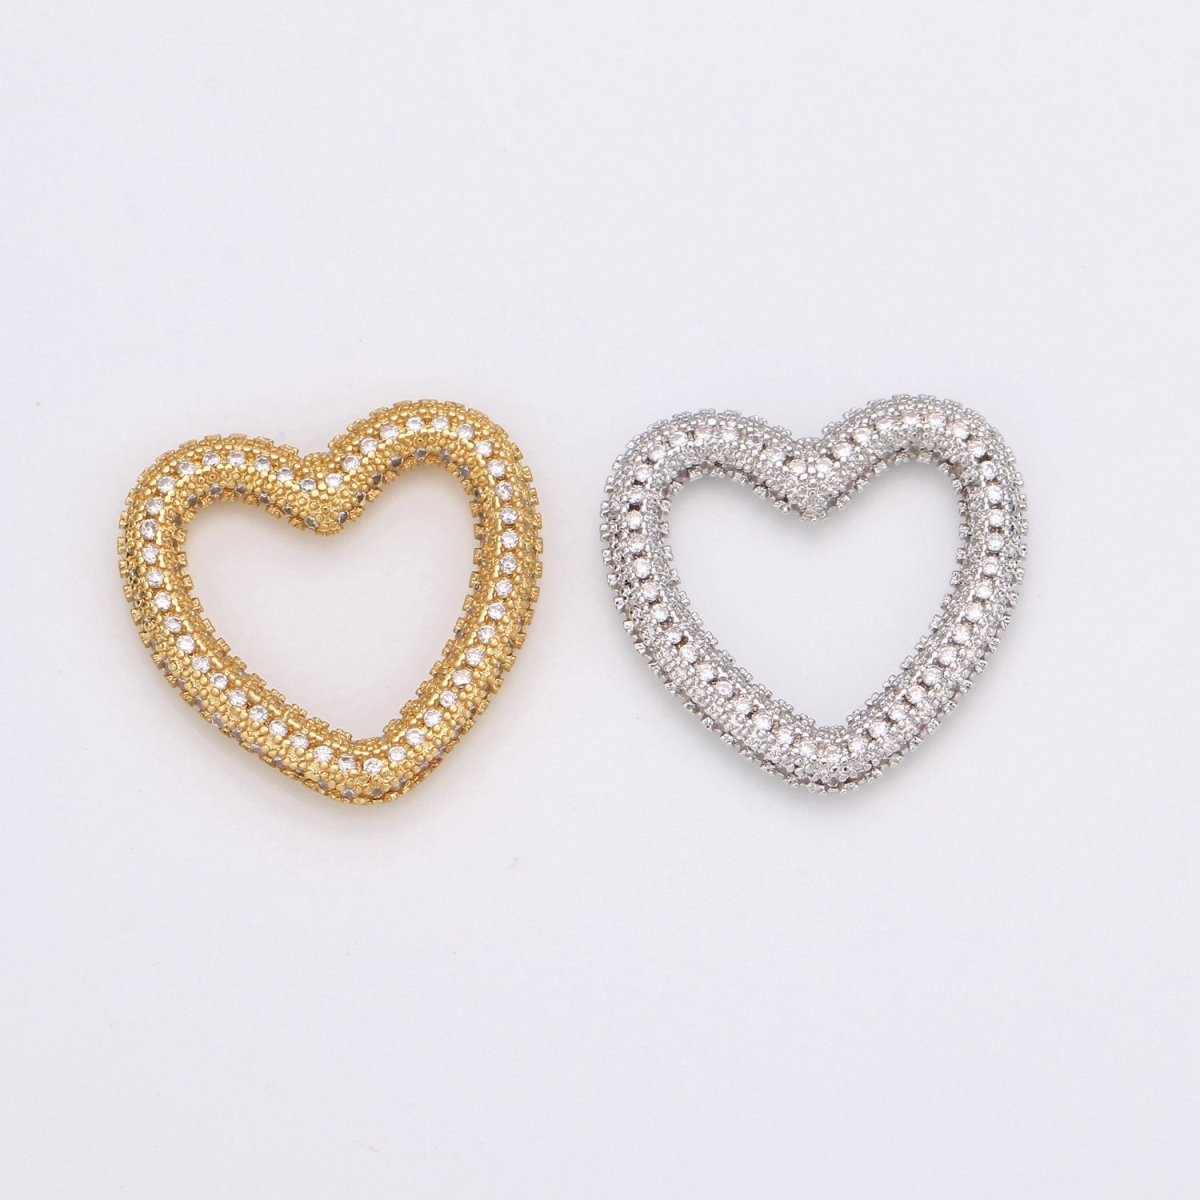 Dainty Heart Charm in Gold Filled - White Gold Filled Love Jewelry Micro Pave Heart Pendant 25X23mm, K-591 K-592 - DLUXCA